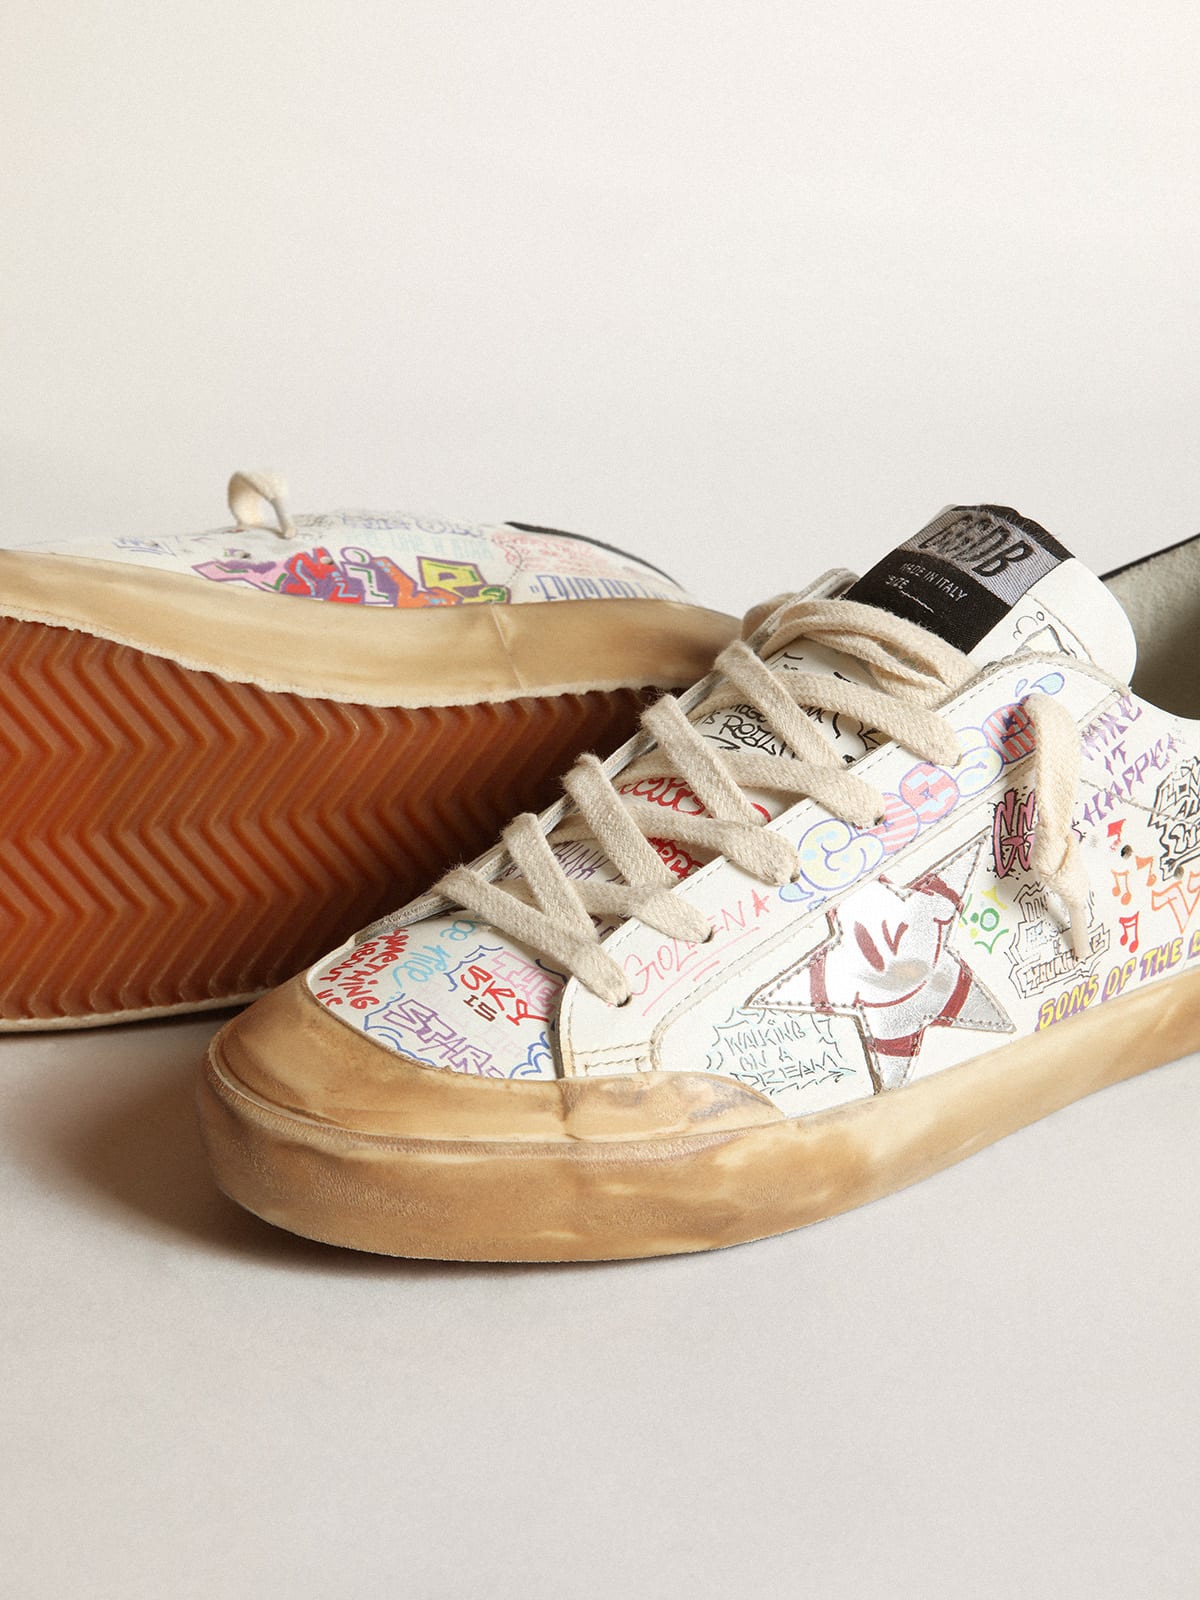 Golden Goose - Women’s Super-Star Penstar sneakers in white leather with all-over multicolored lettering in 